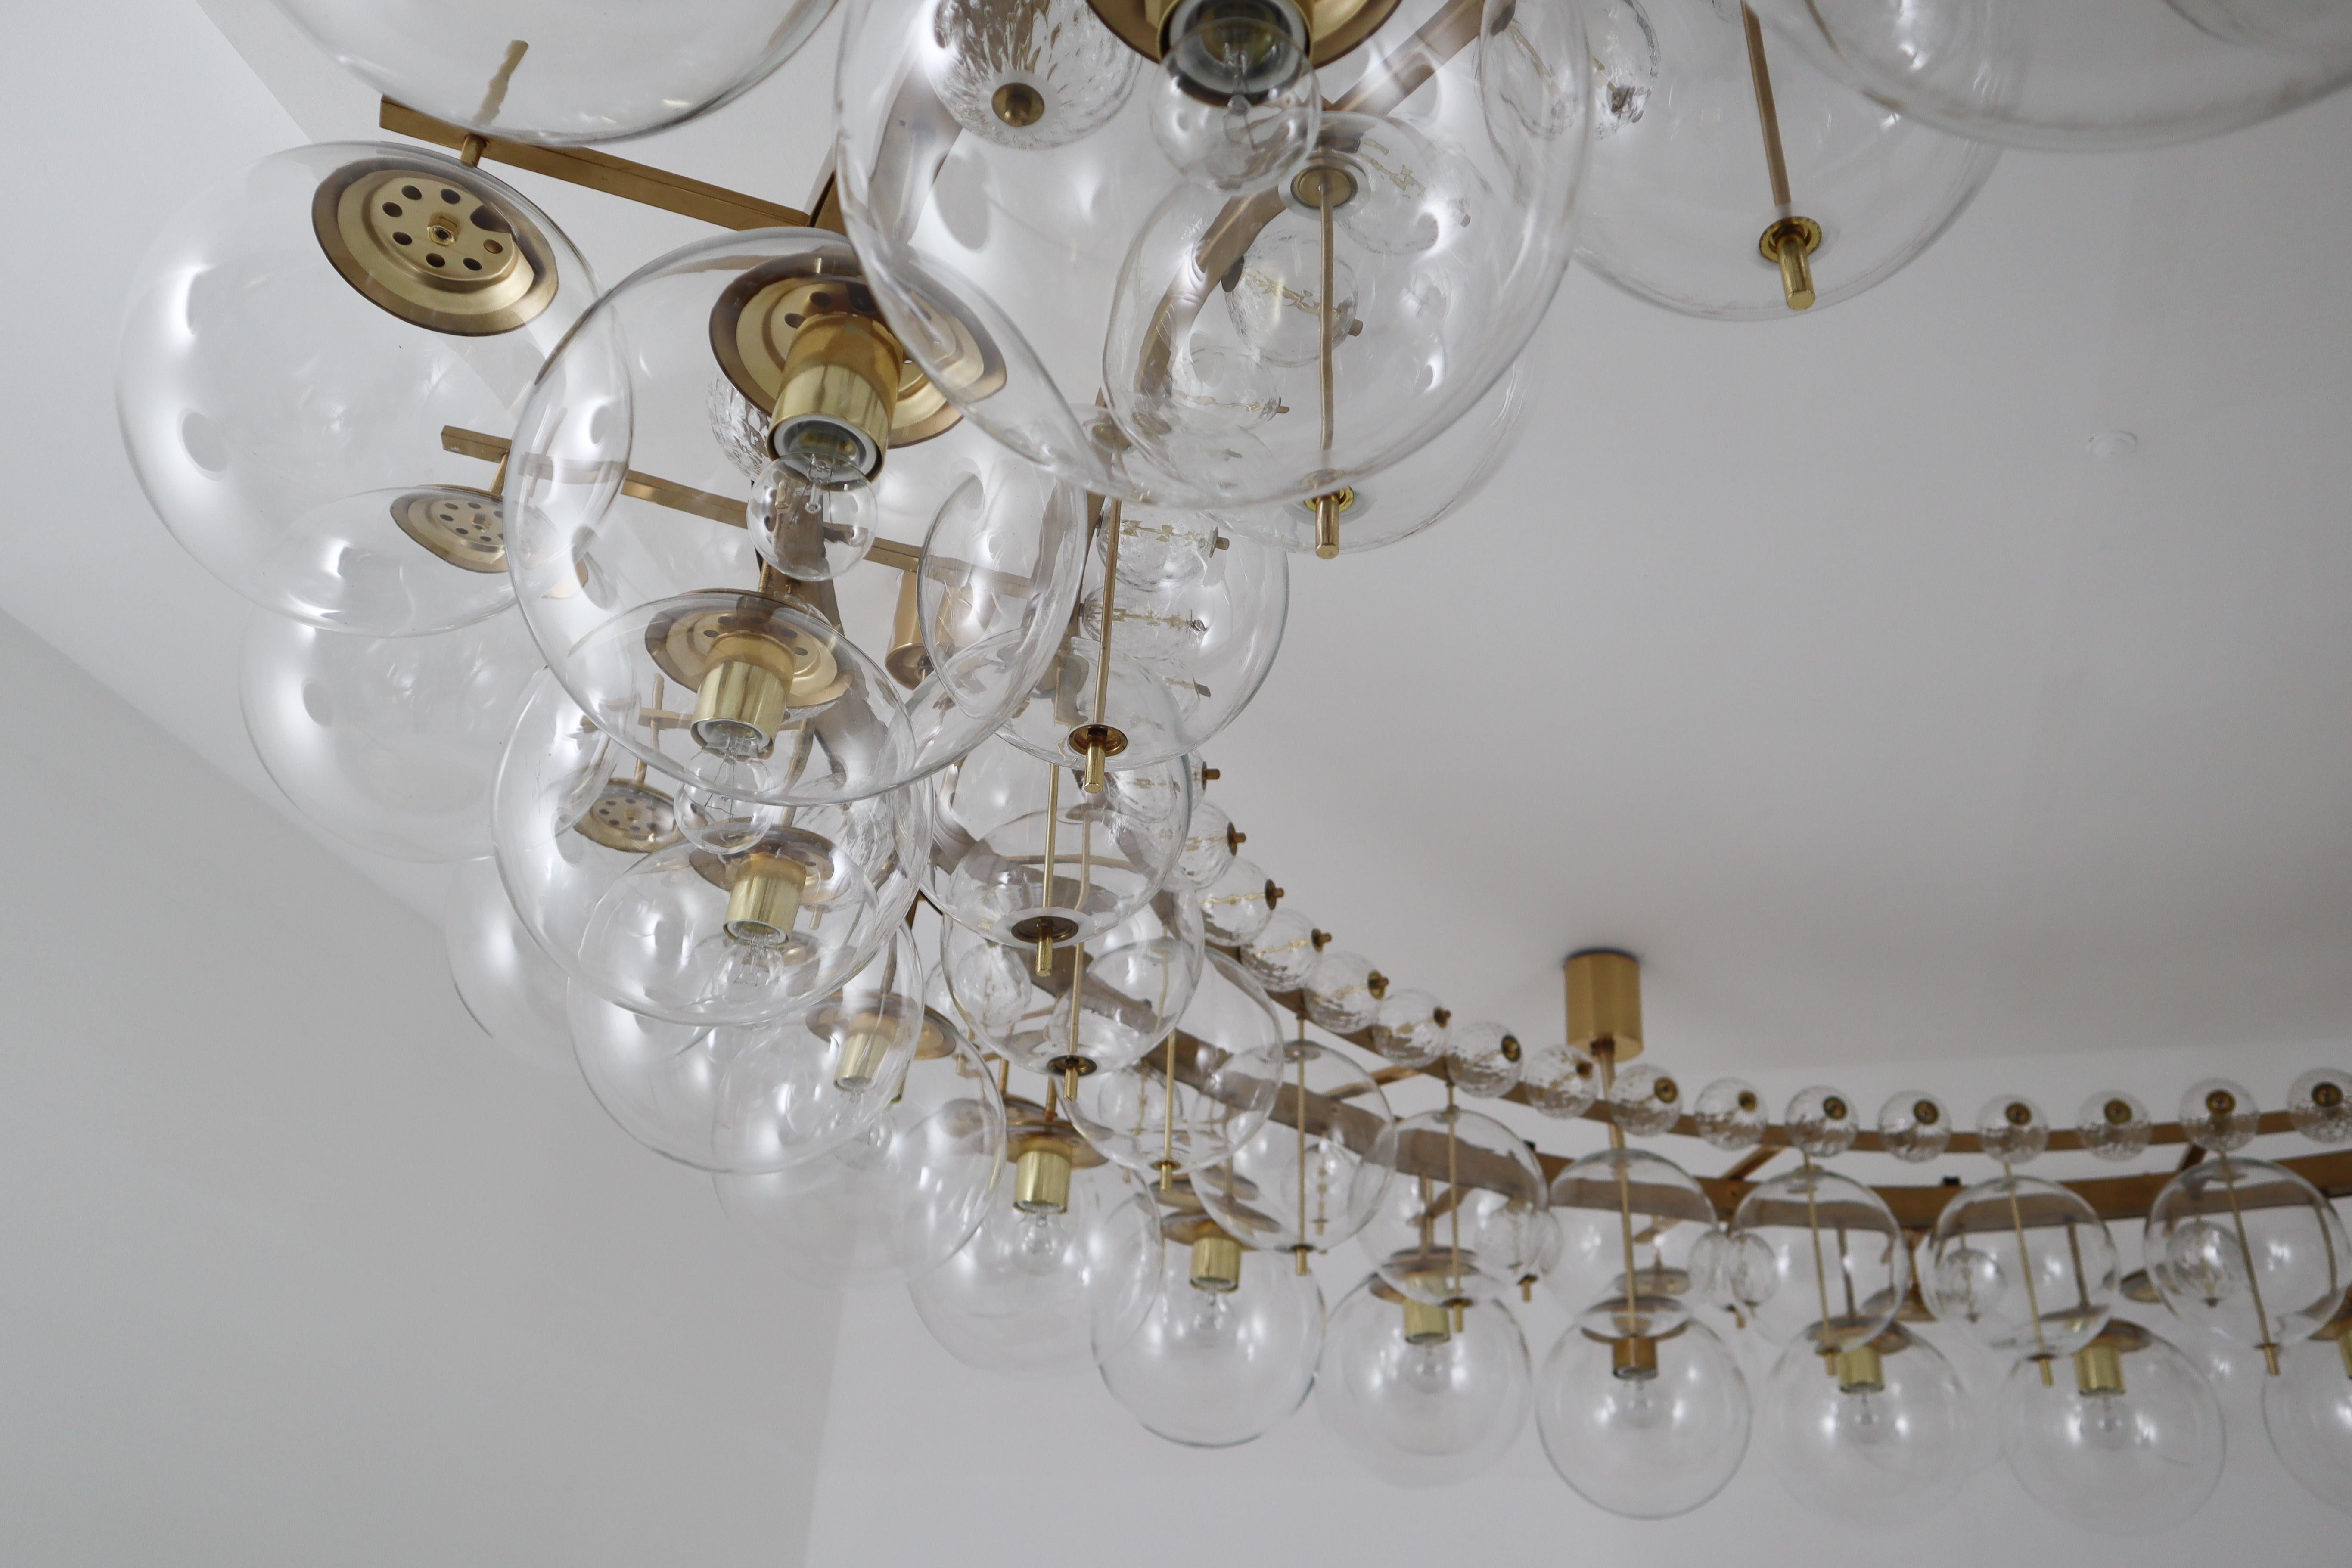 Two Extremely Large Hotel Chandeliers with Brass Fixture and Hand-Blowed Glass 12